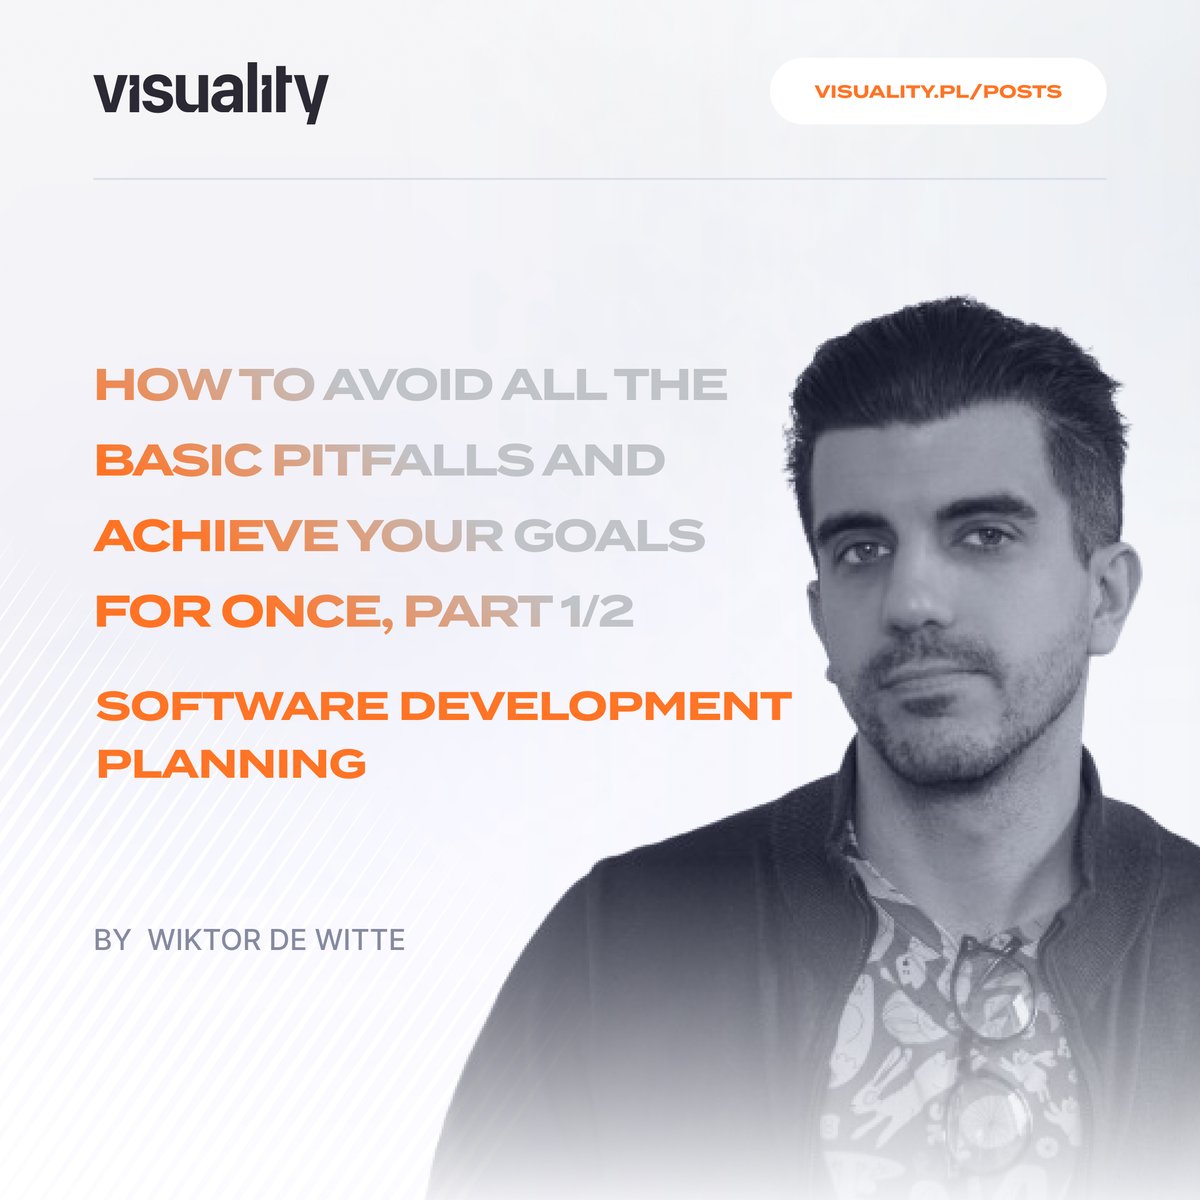 New article on the Visuality blog.📝This time we're covering software development planning. Grab your coffee and read!⬇️
visuality.pl/posts/software…
#Projectmanager #business #Software